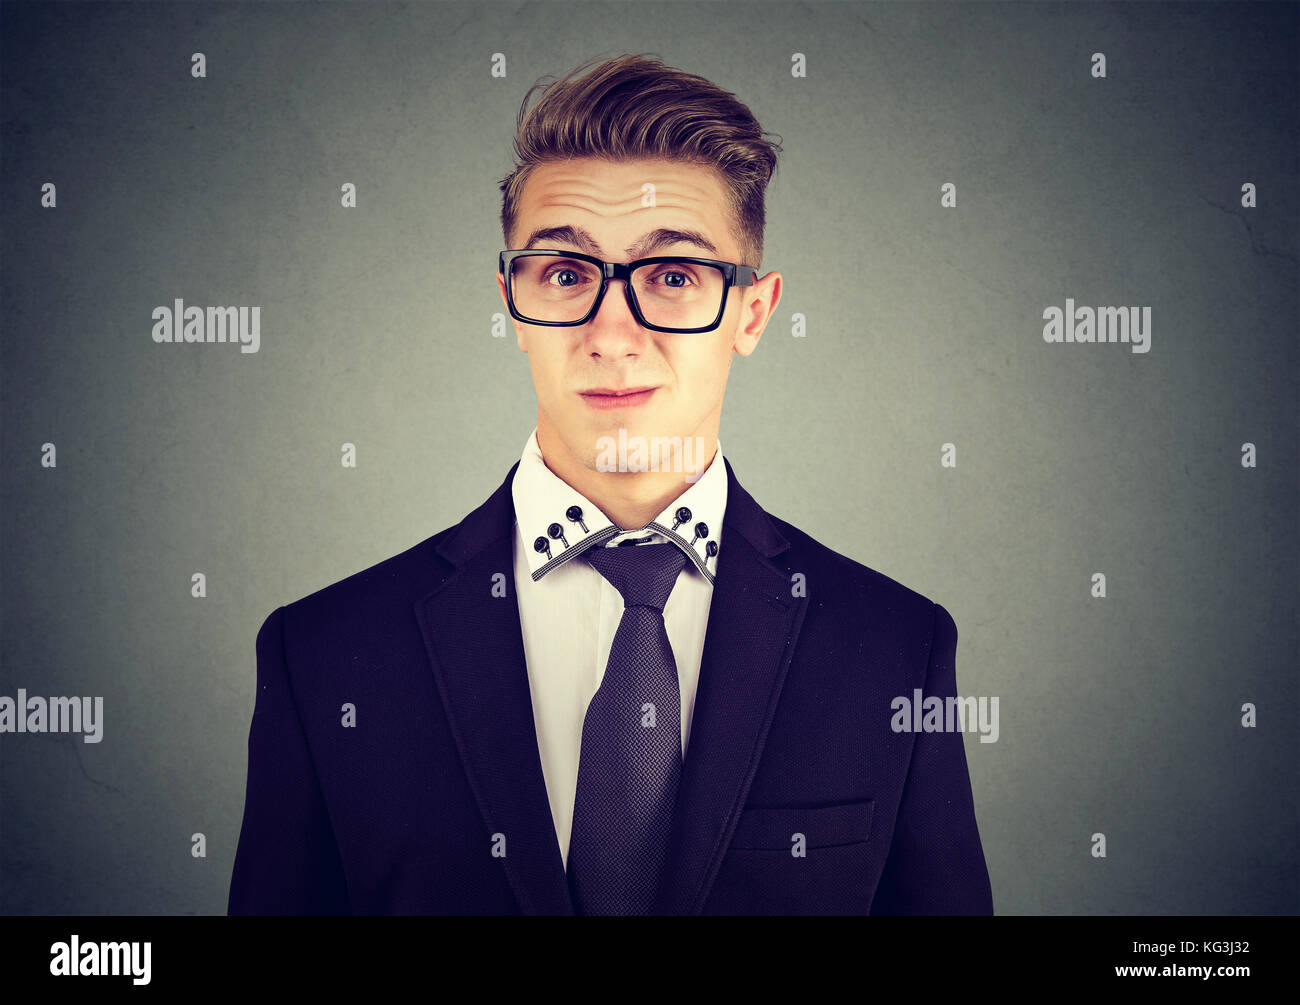 Young man with snobbish expression Stock Photo